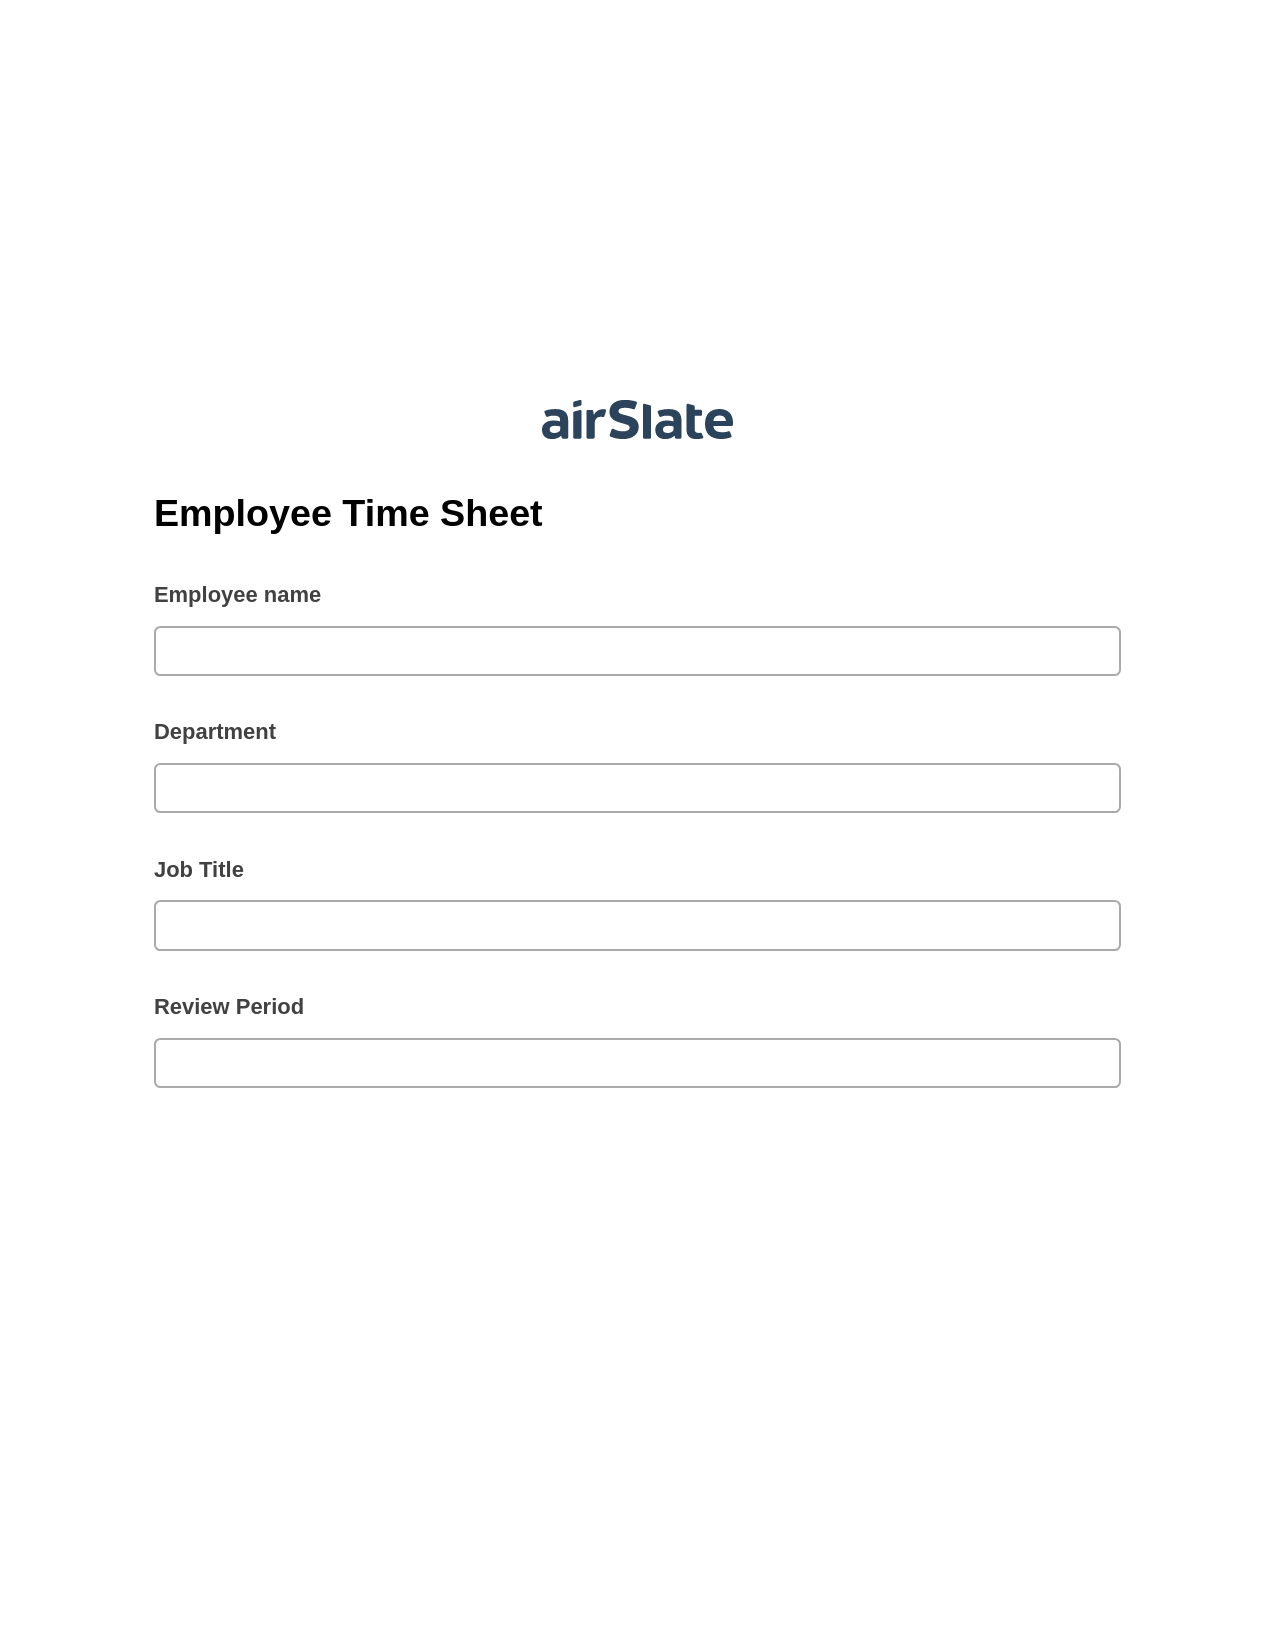 Multirole Employee Time Sheet Pre-fill Dropdowns from CSV file Bot, Update Audit Trail Bot, Email Notification Postfinish Bot